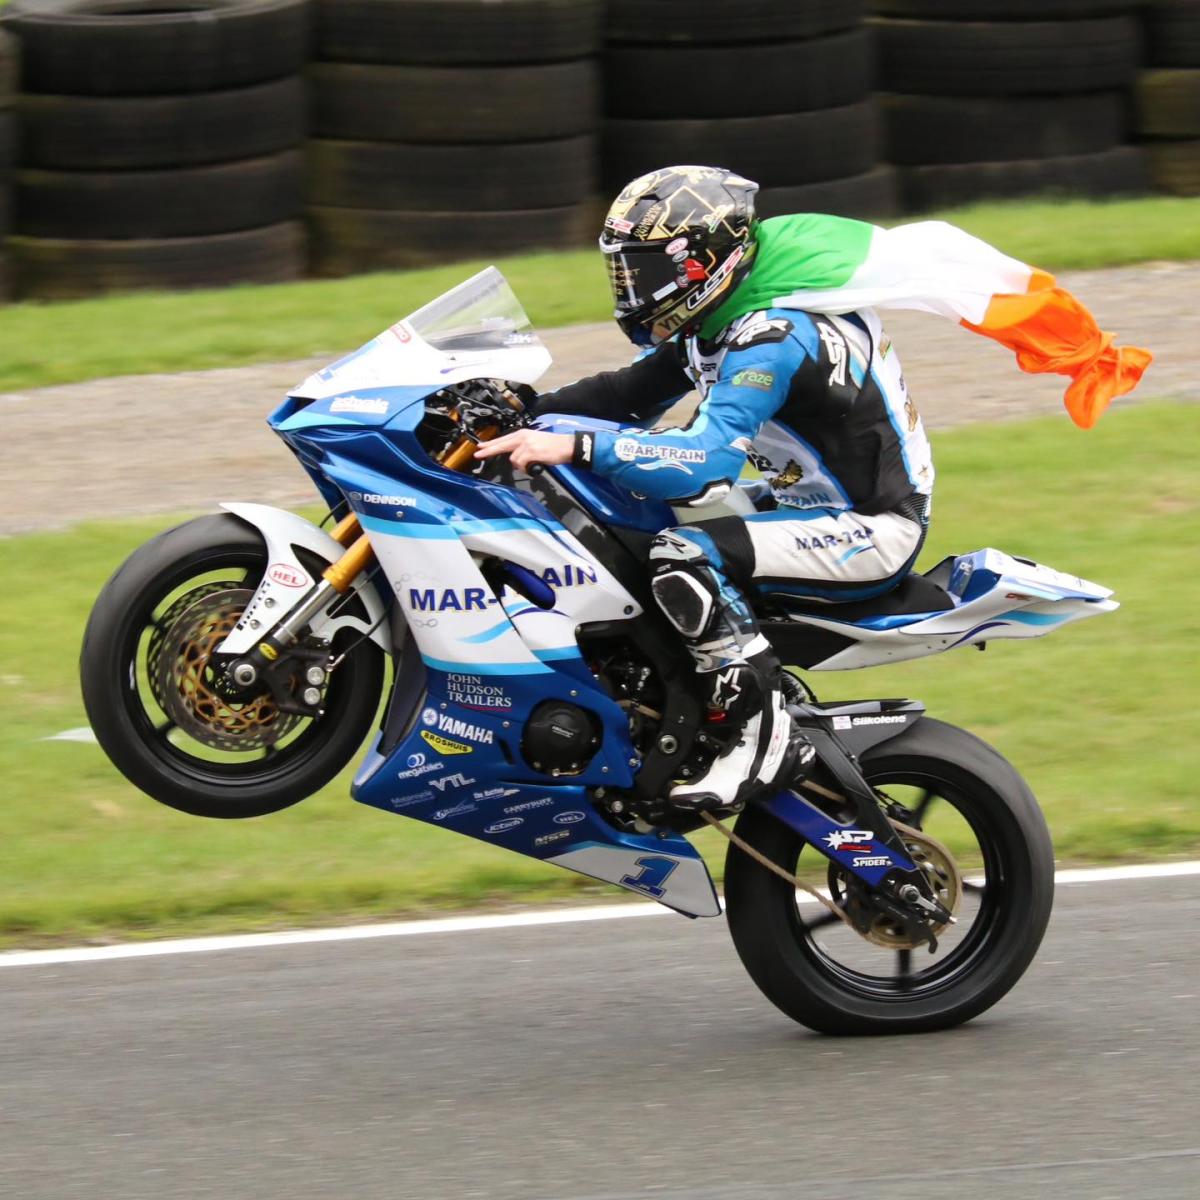 Jack Kennedy clinches his 4th British Supersport Title.